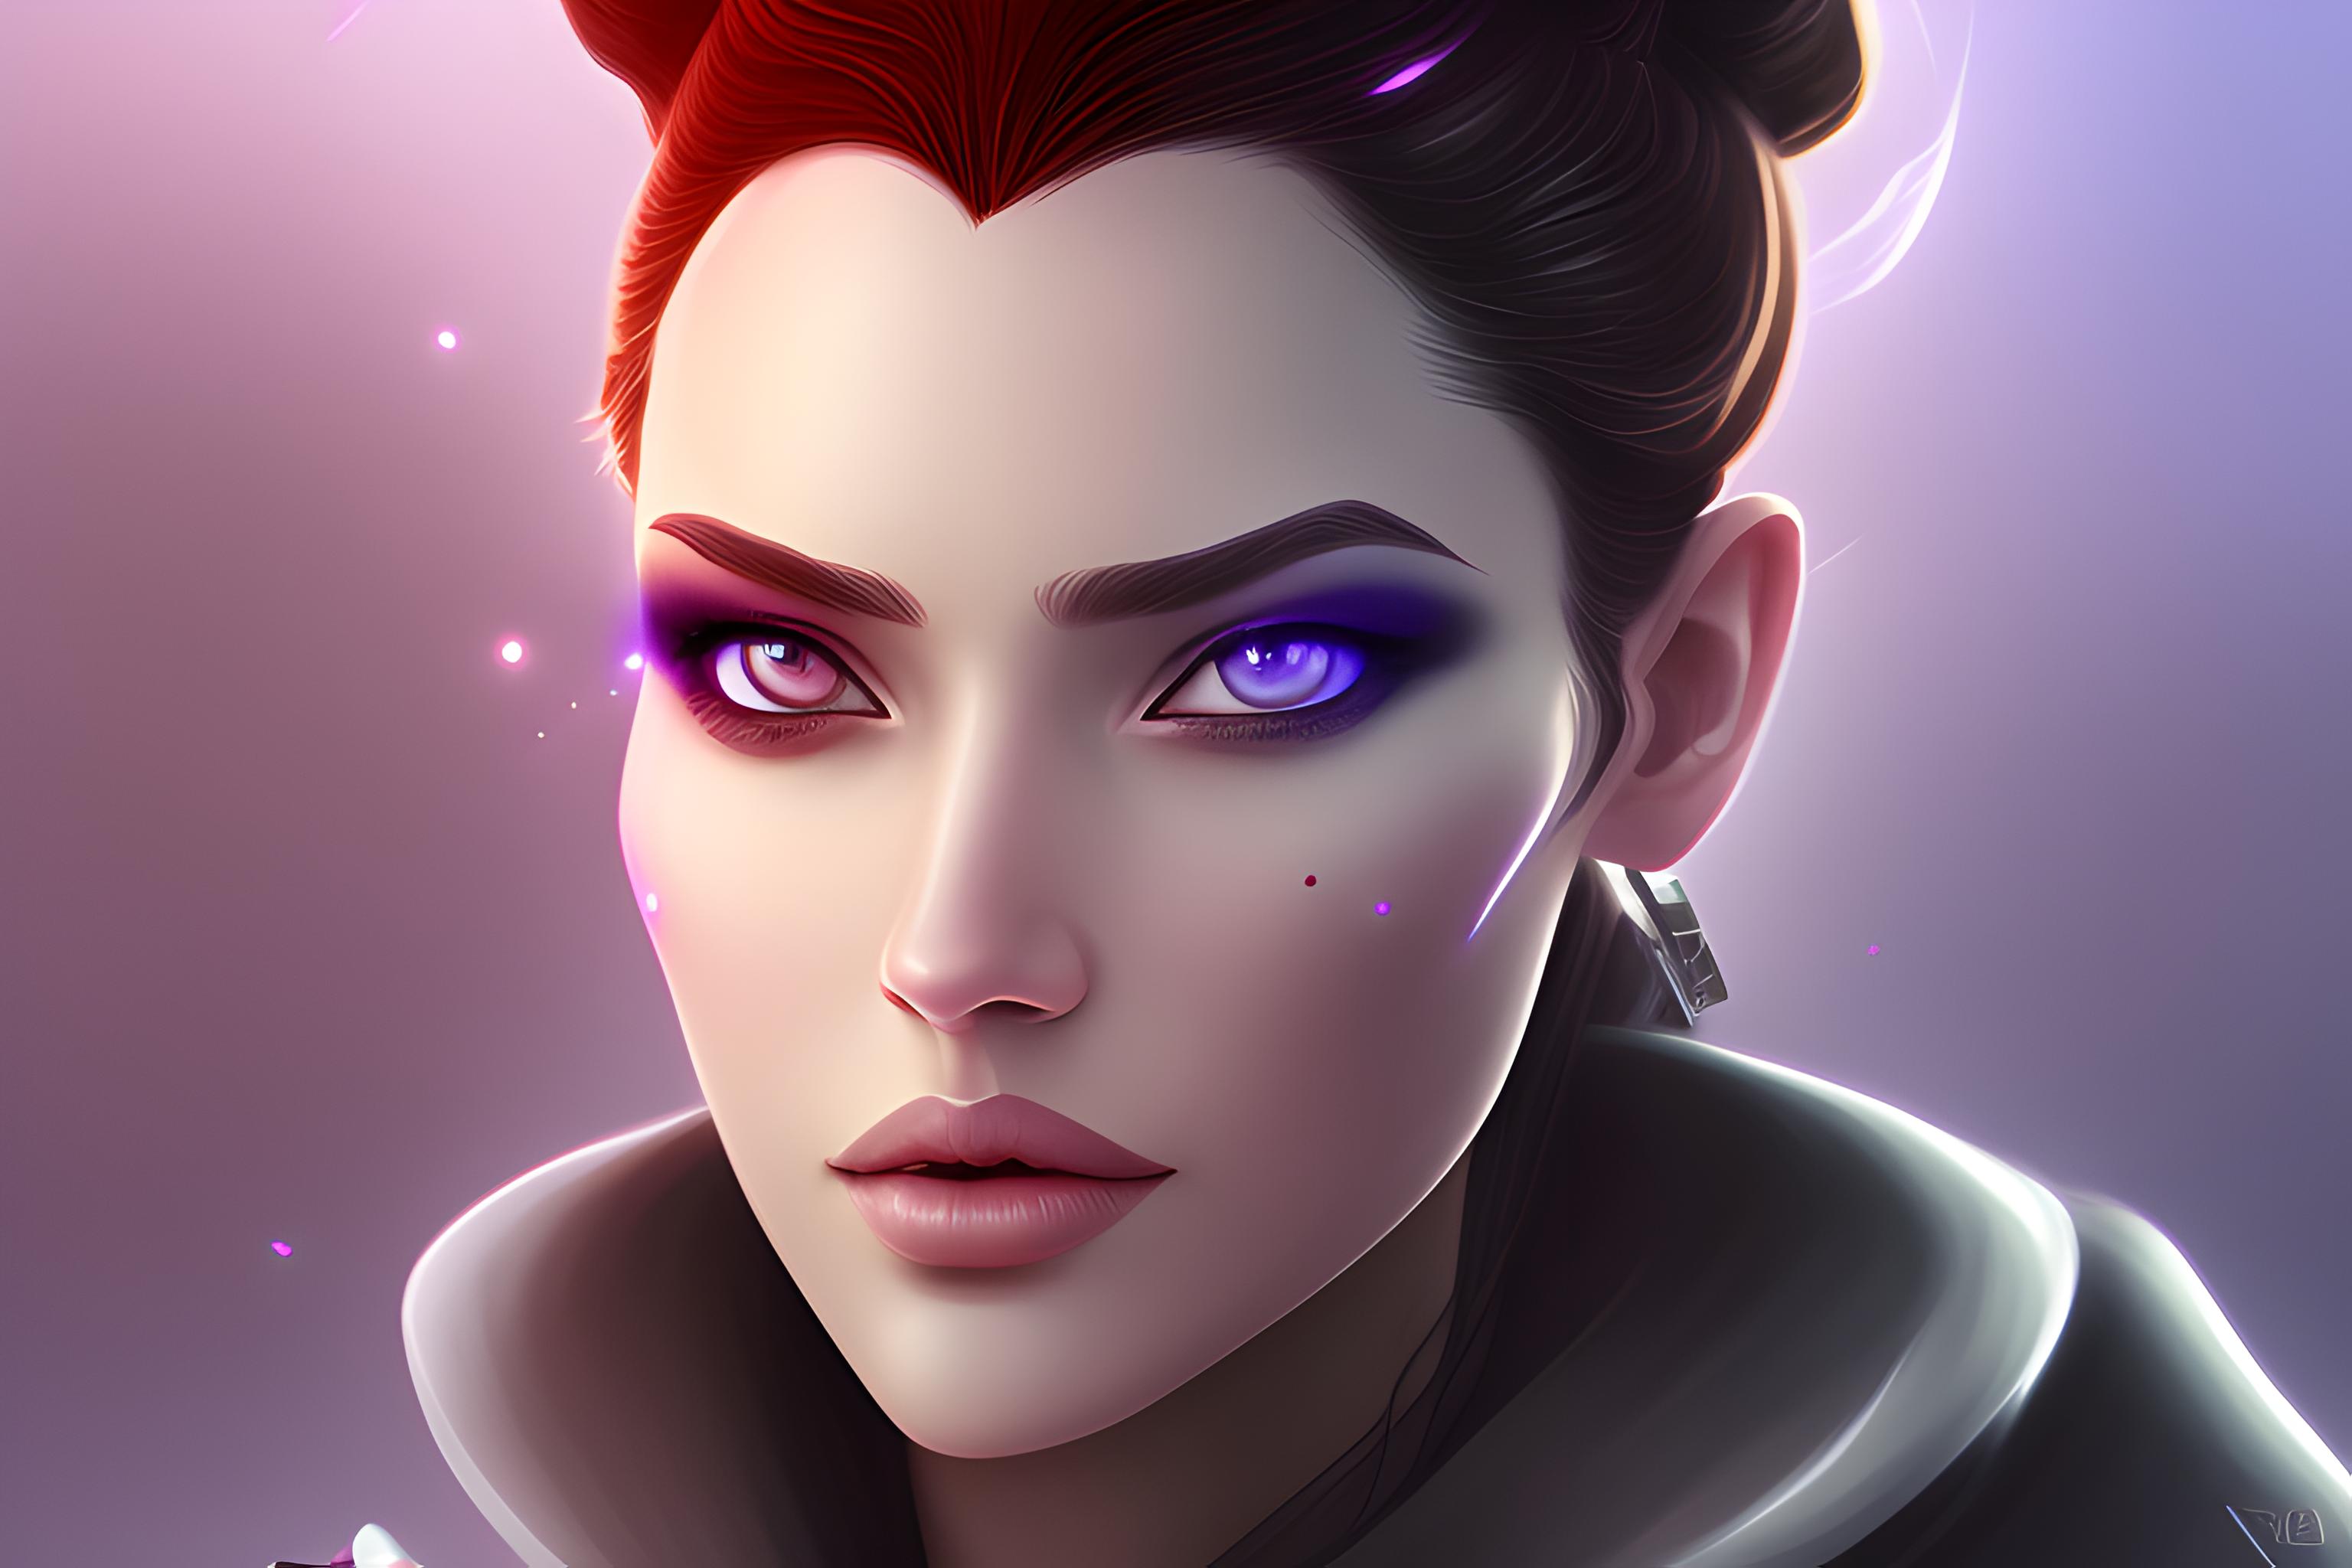 Reyna Agent from valorant with purple eye background | Wallpapers.ai